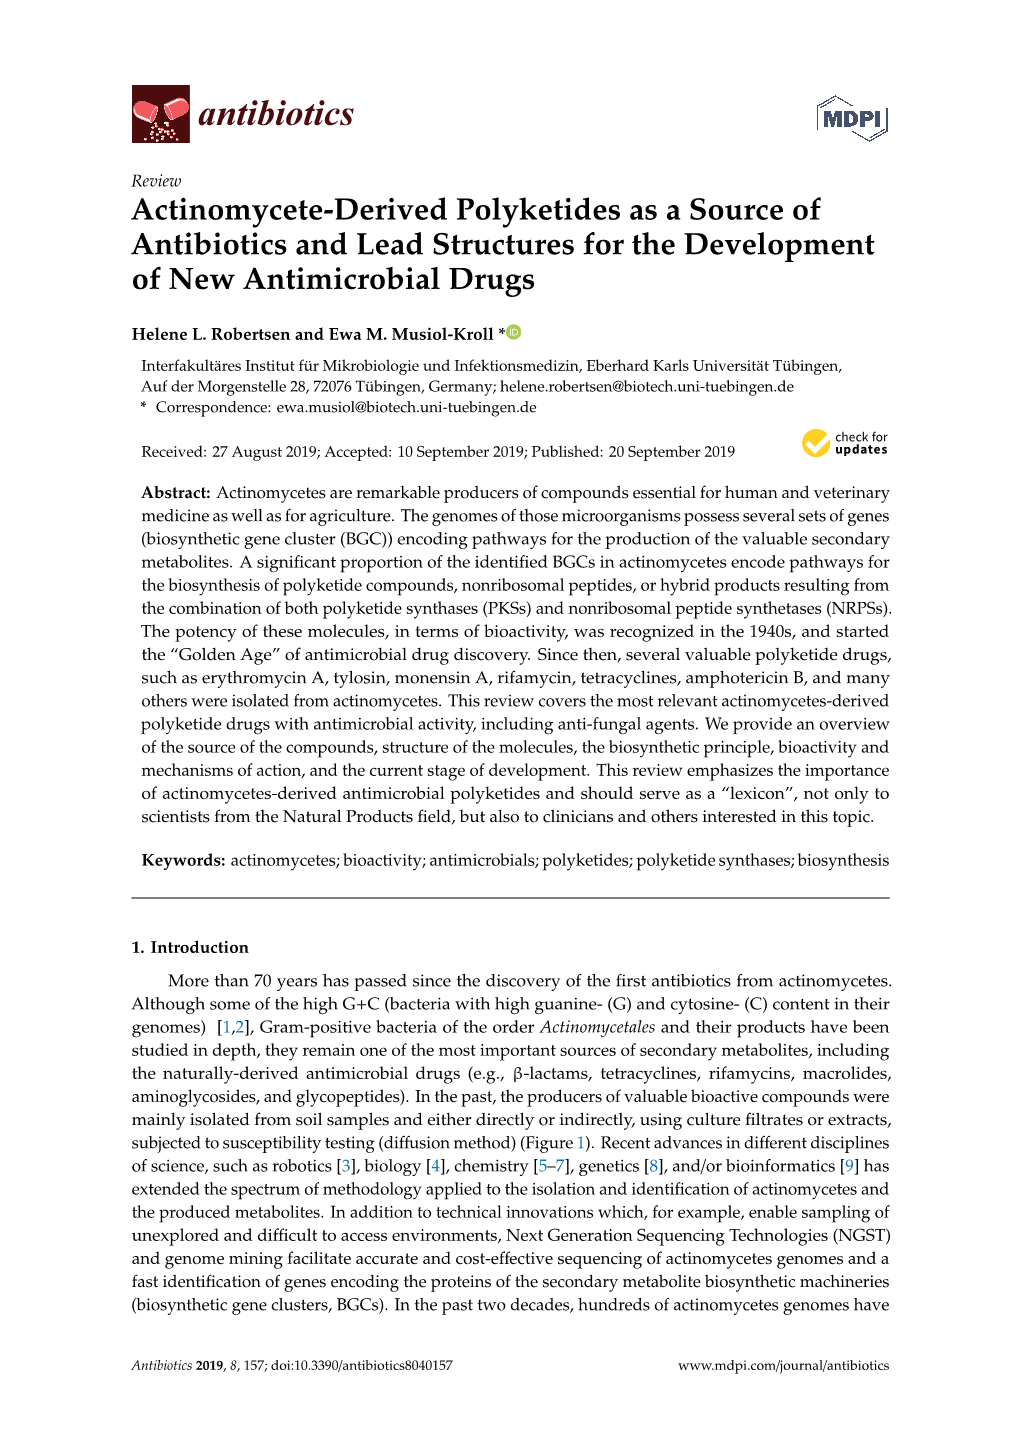 Actinomycete-Derived Polyketides As a Source of Antibiotics and Lead Structures for the Development of New Antimicrobial Drugs